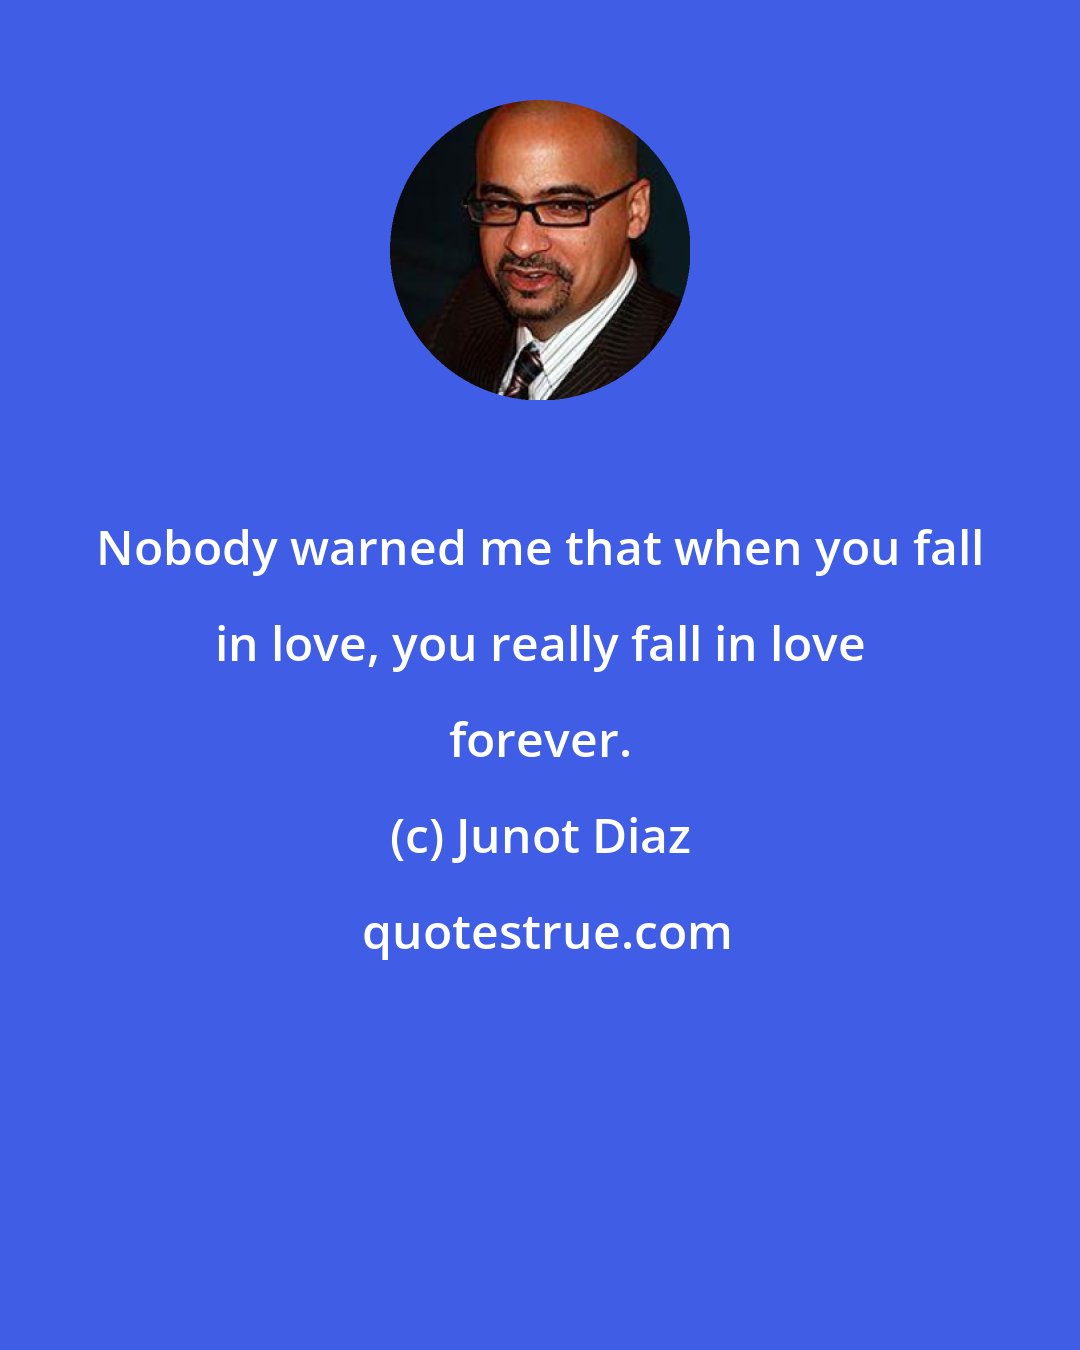 Junot Diaz: Nobody warned me that when you fall in love, you really fall in love forever.